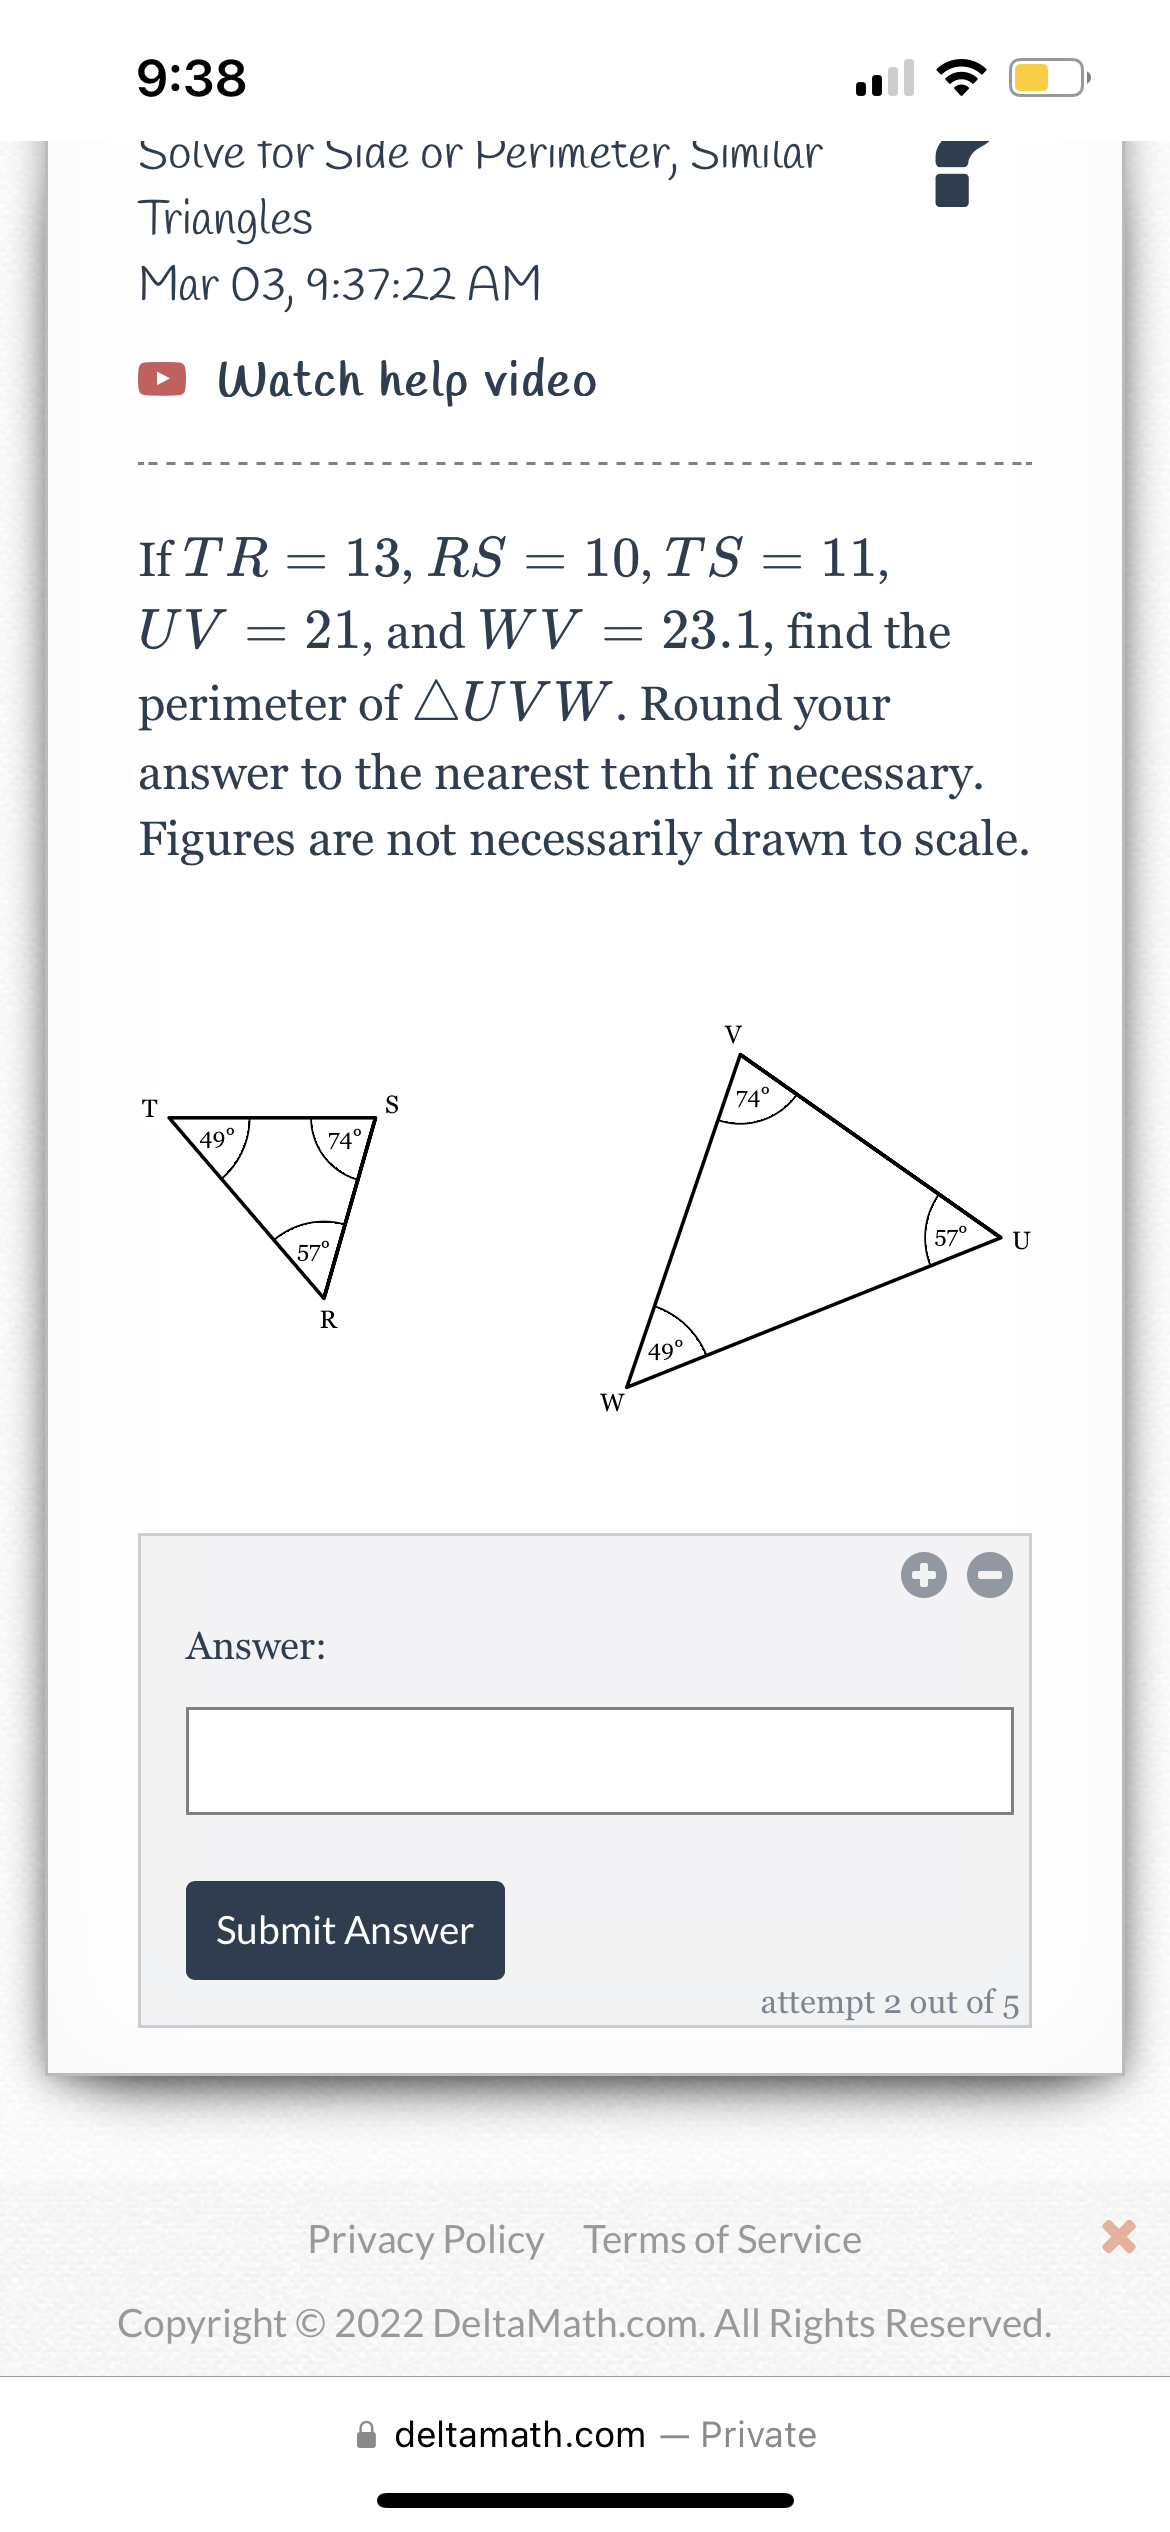 9:38
Solve for Side or Perimeter, Similar
Triangles
Mar 03, 9:37:22 AM
Watch help video
If TR = 13, RS = 10, TS = 11,
-
UV 21, and WV = 23.1, find the
perimeter of AUVW. Round your
answer to the nearest tenth if necessary.
Figures are not necessarily drawn to scale.
T
49⁰
=
74°
57⁰
R
Answer:
S
Submit Answer
W
49⁰
V
74°
57⁰
U
attempt 2 out of 5
deltamath.com - Private
Privacy Policy Terms of Service
Copyright © 2022 DeltaMath.com. All Rights Reserved.